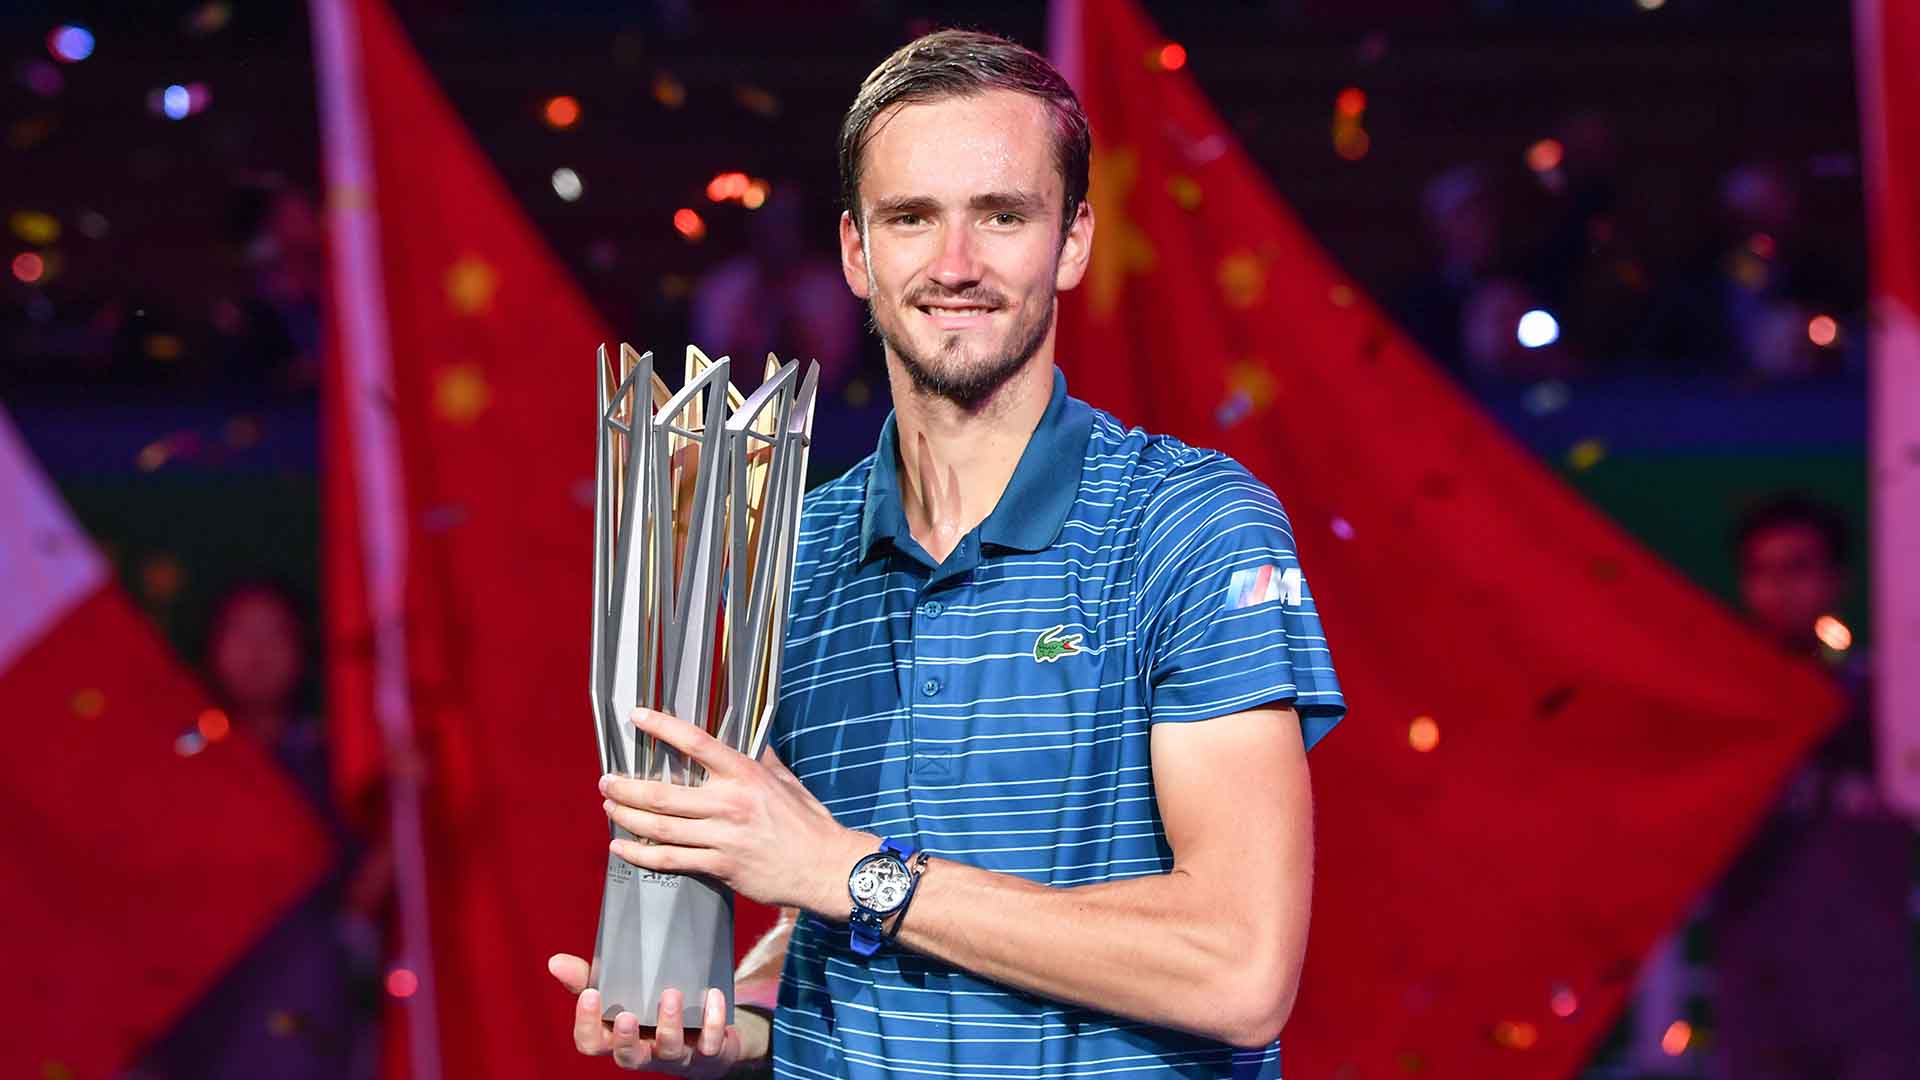 Daniil Medvedev owns a 59-17 tour-level record this year.